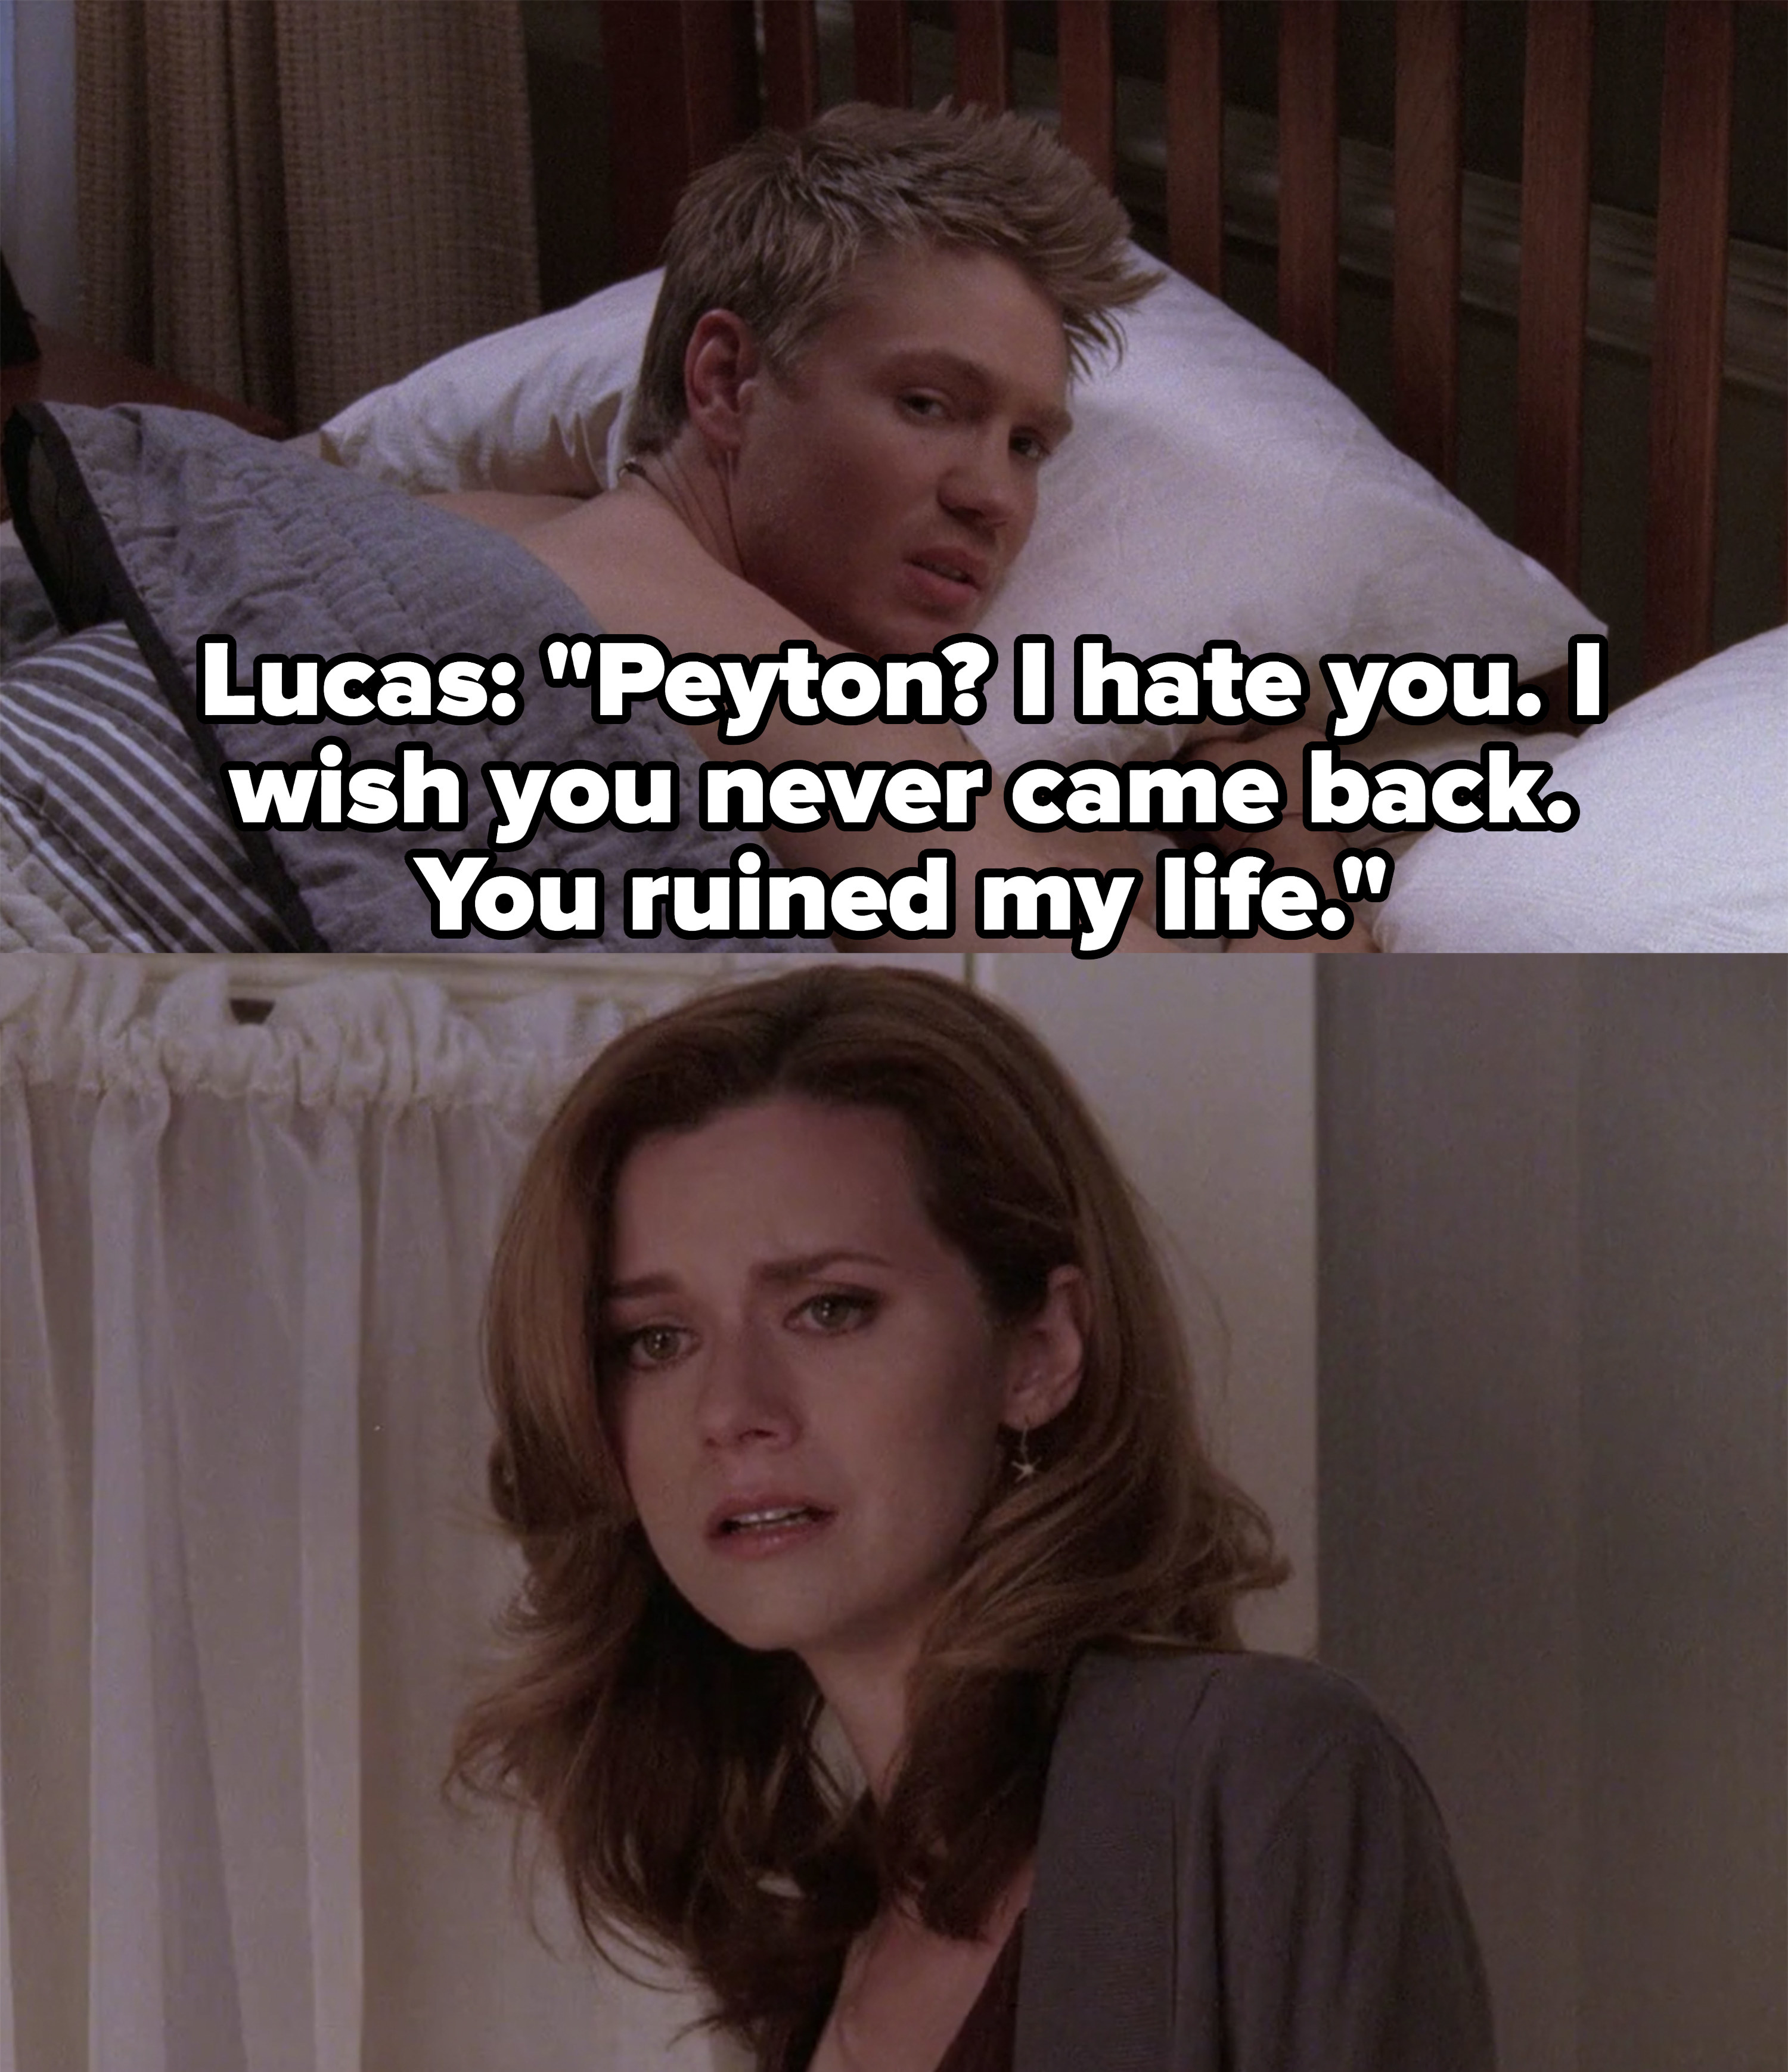 Lucas tells Peyton he hates her and that she ruined his life